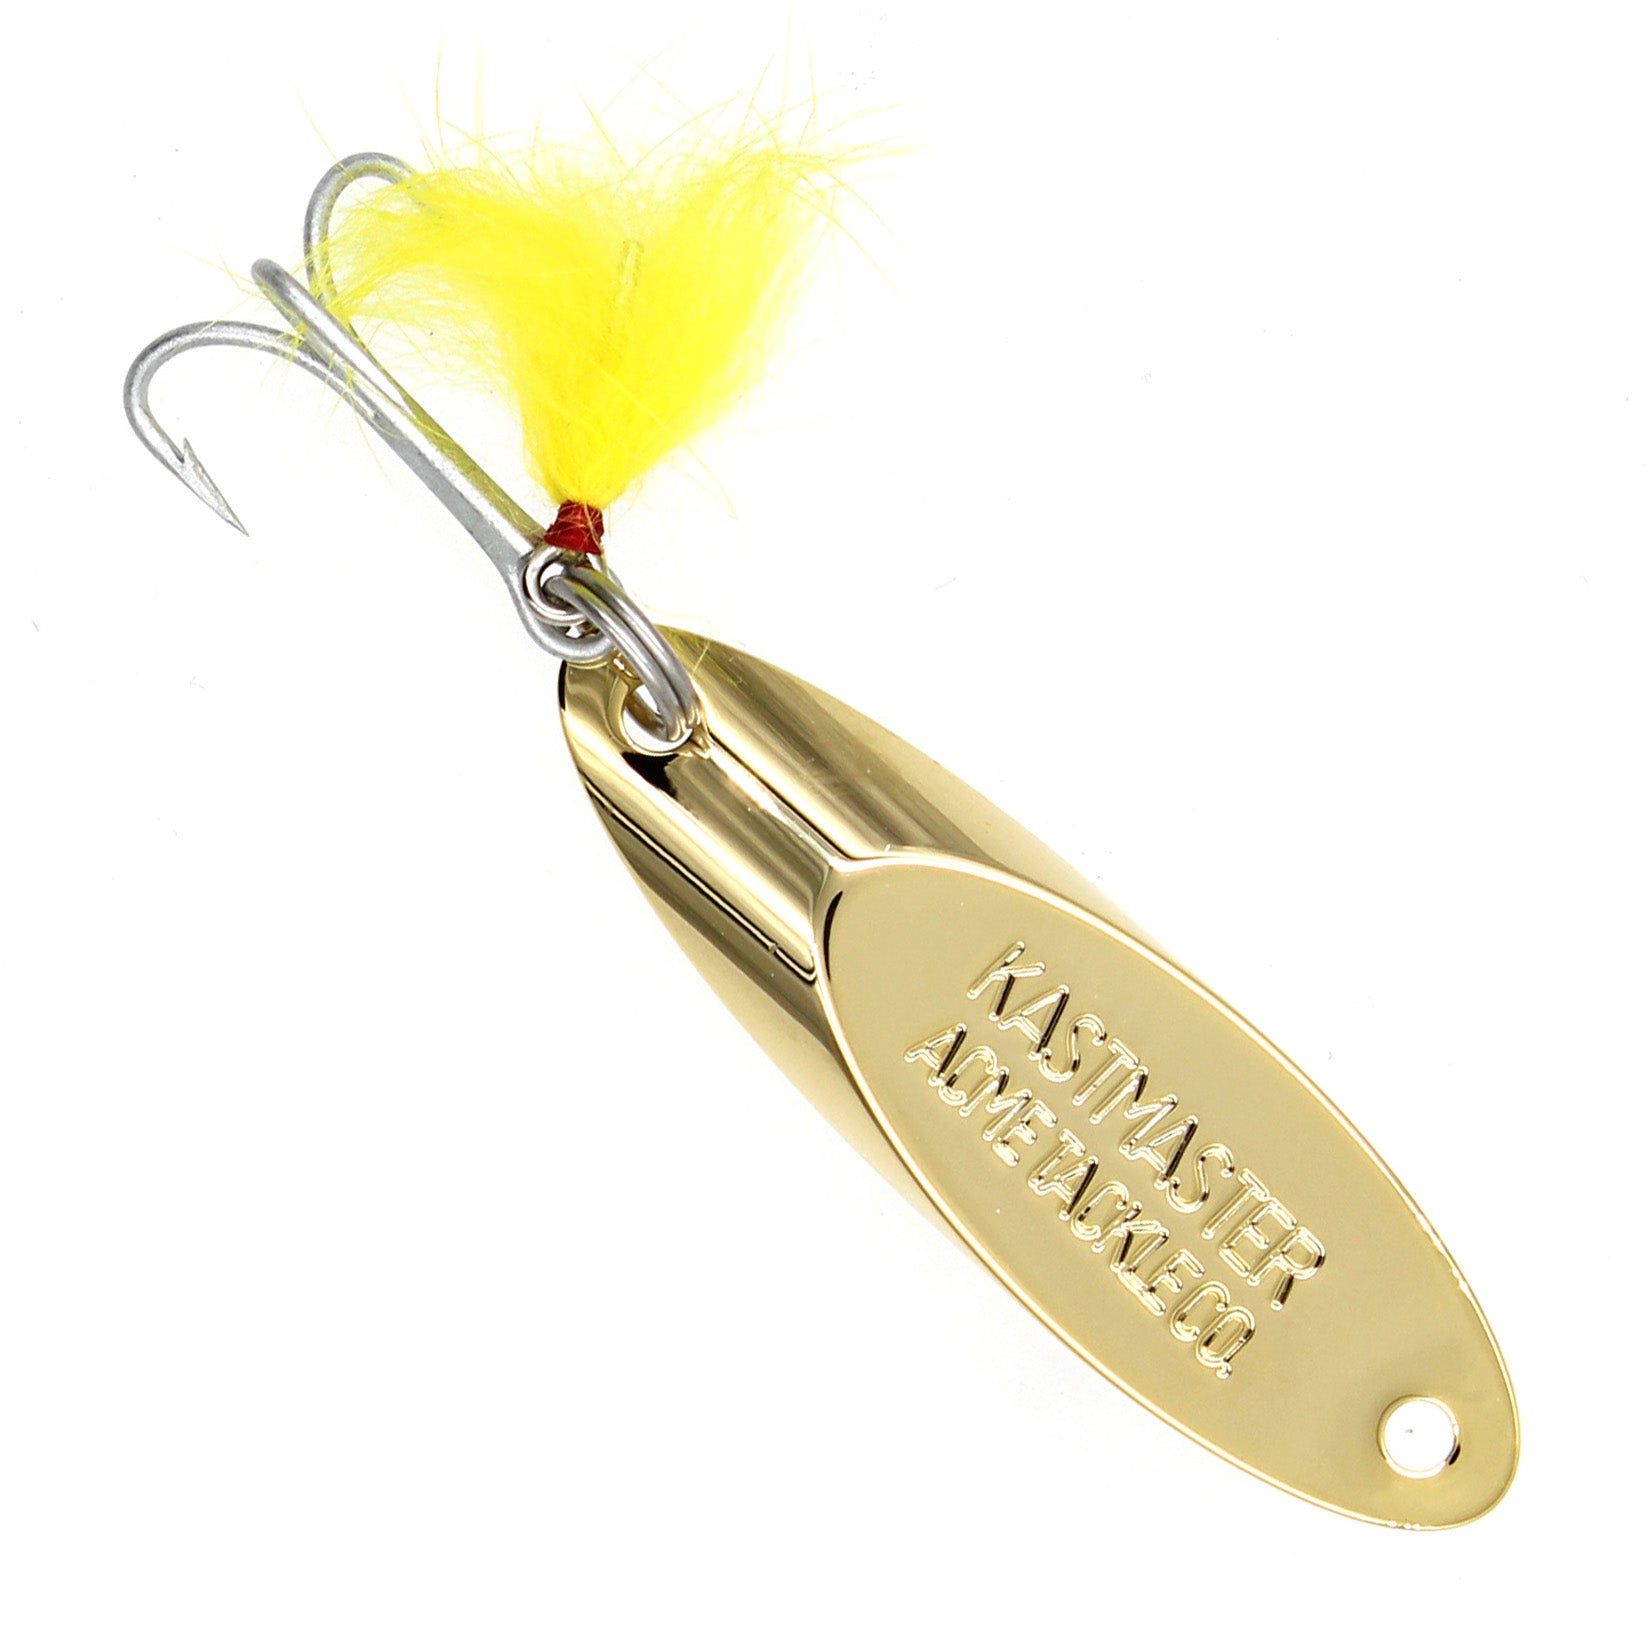 Hightower Tackle Company's 5 Kastmaster Style Gold Spoon, 1 ounce